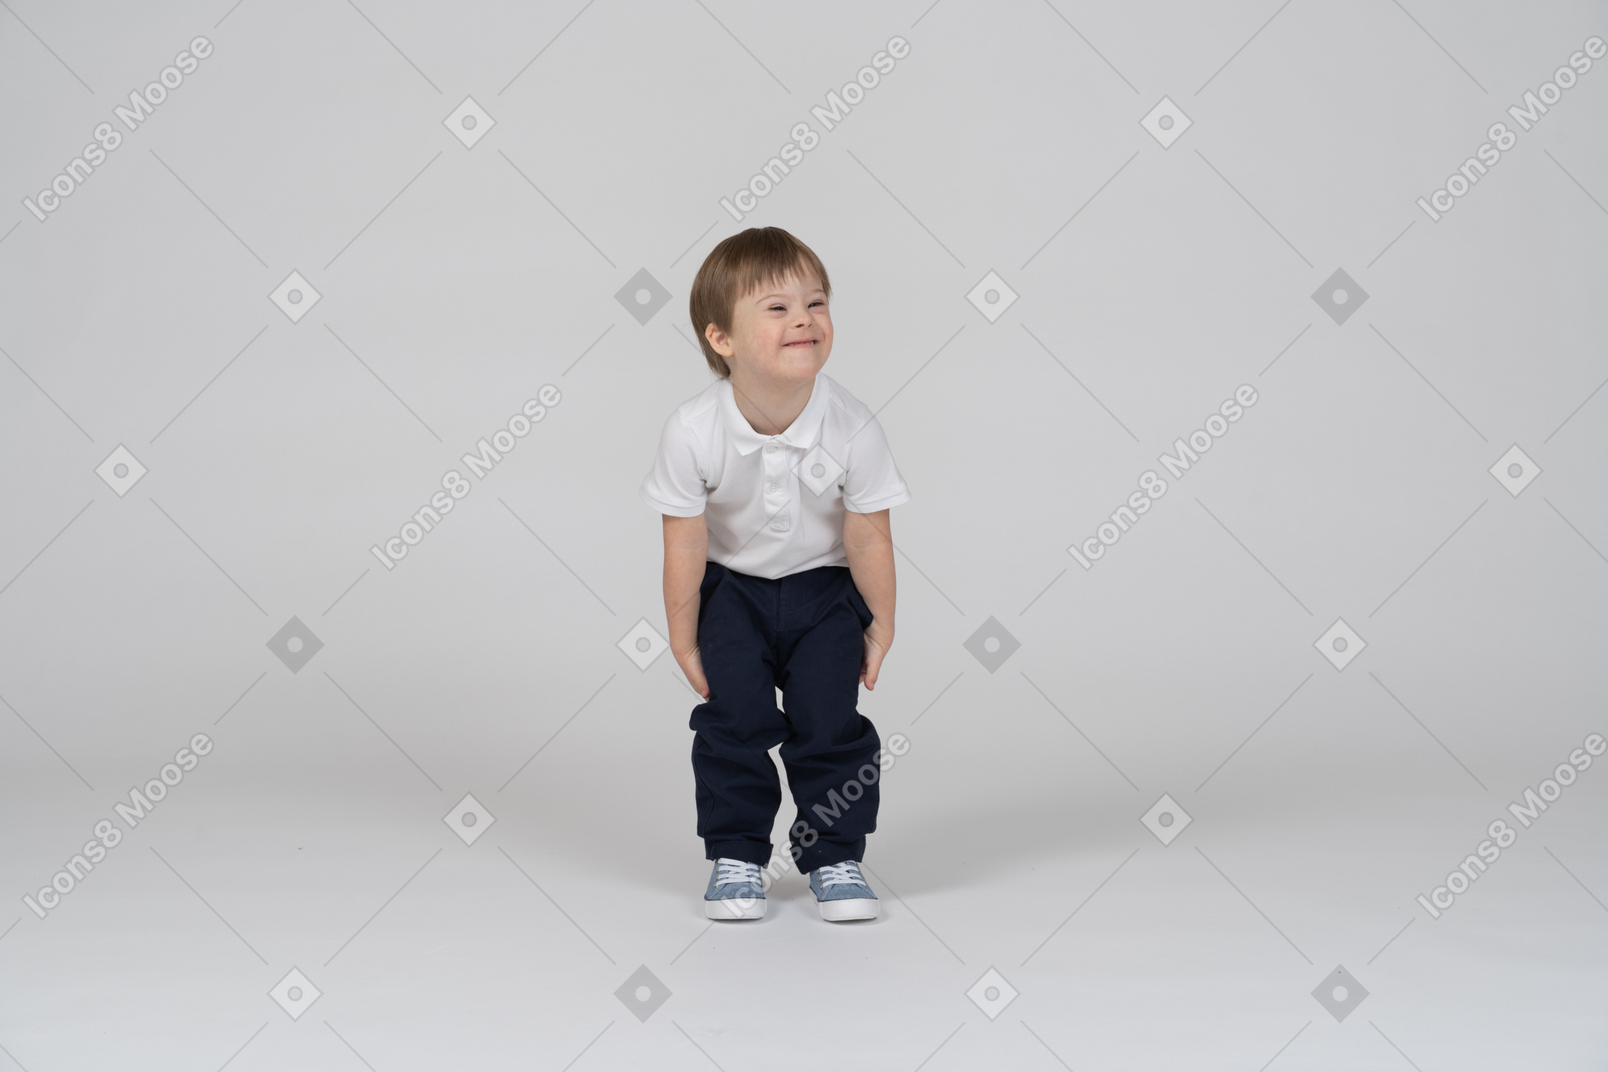 Cheerful boy leaning forward and looking aside